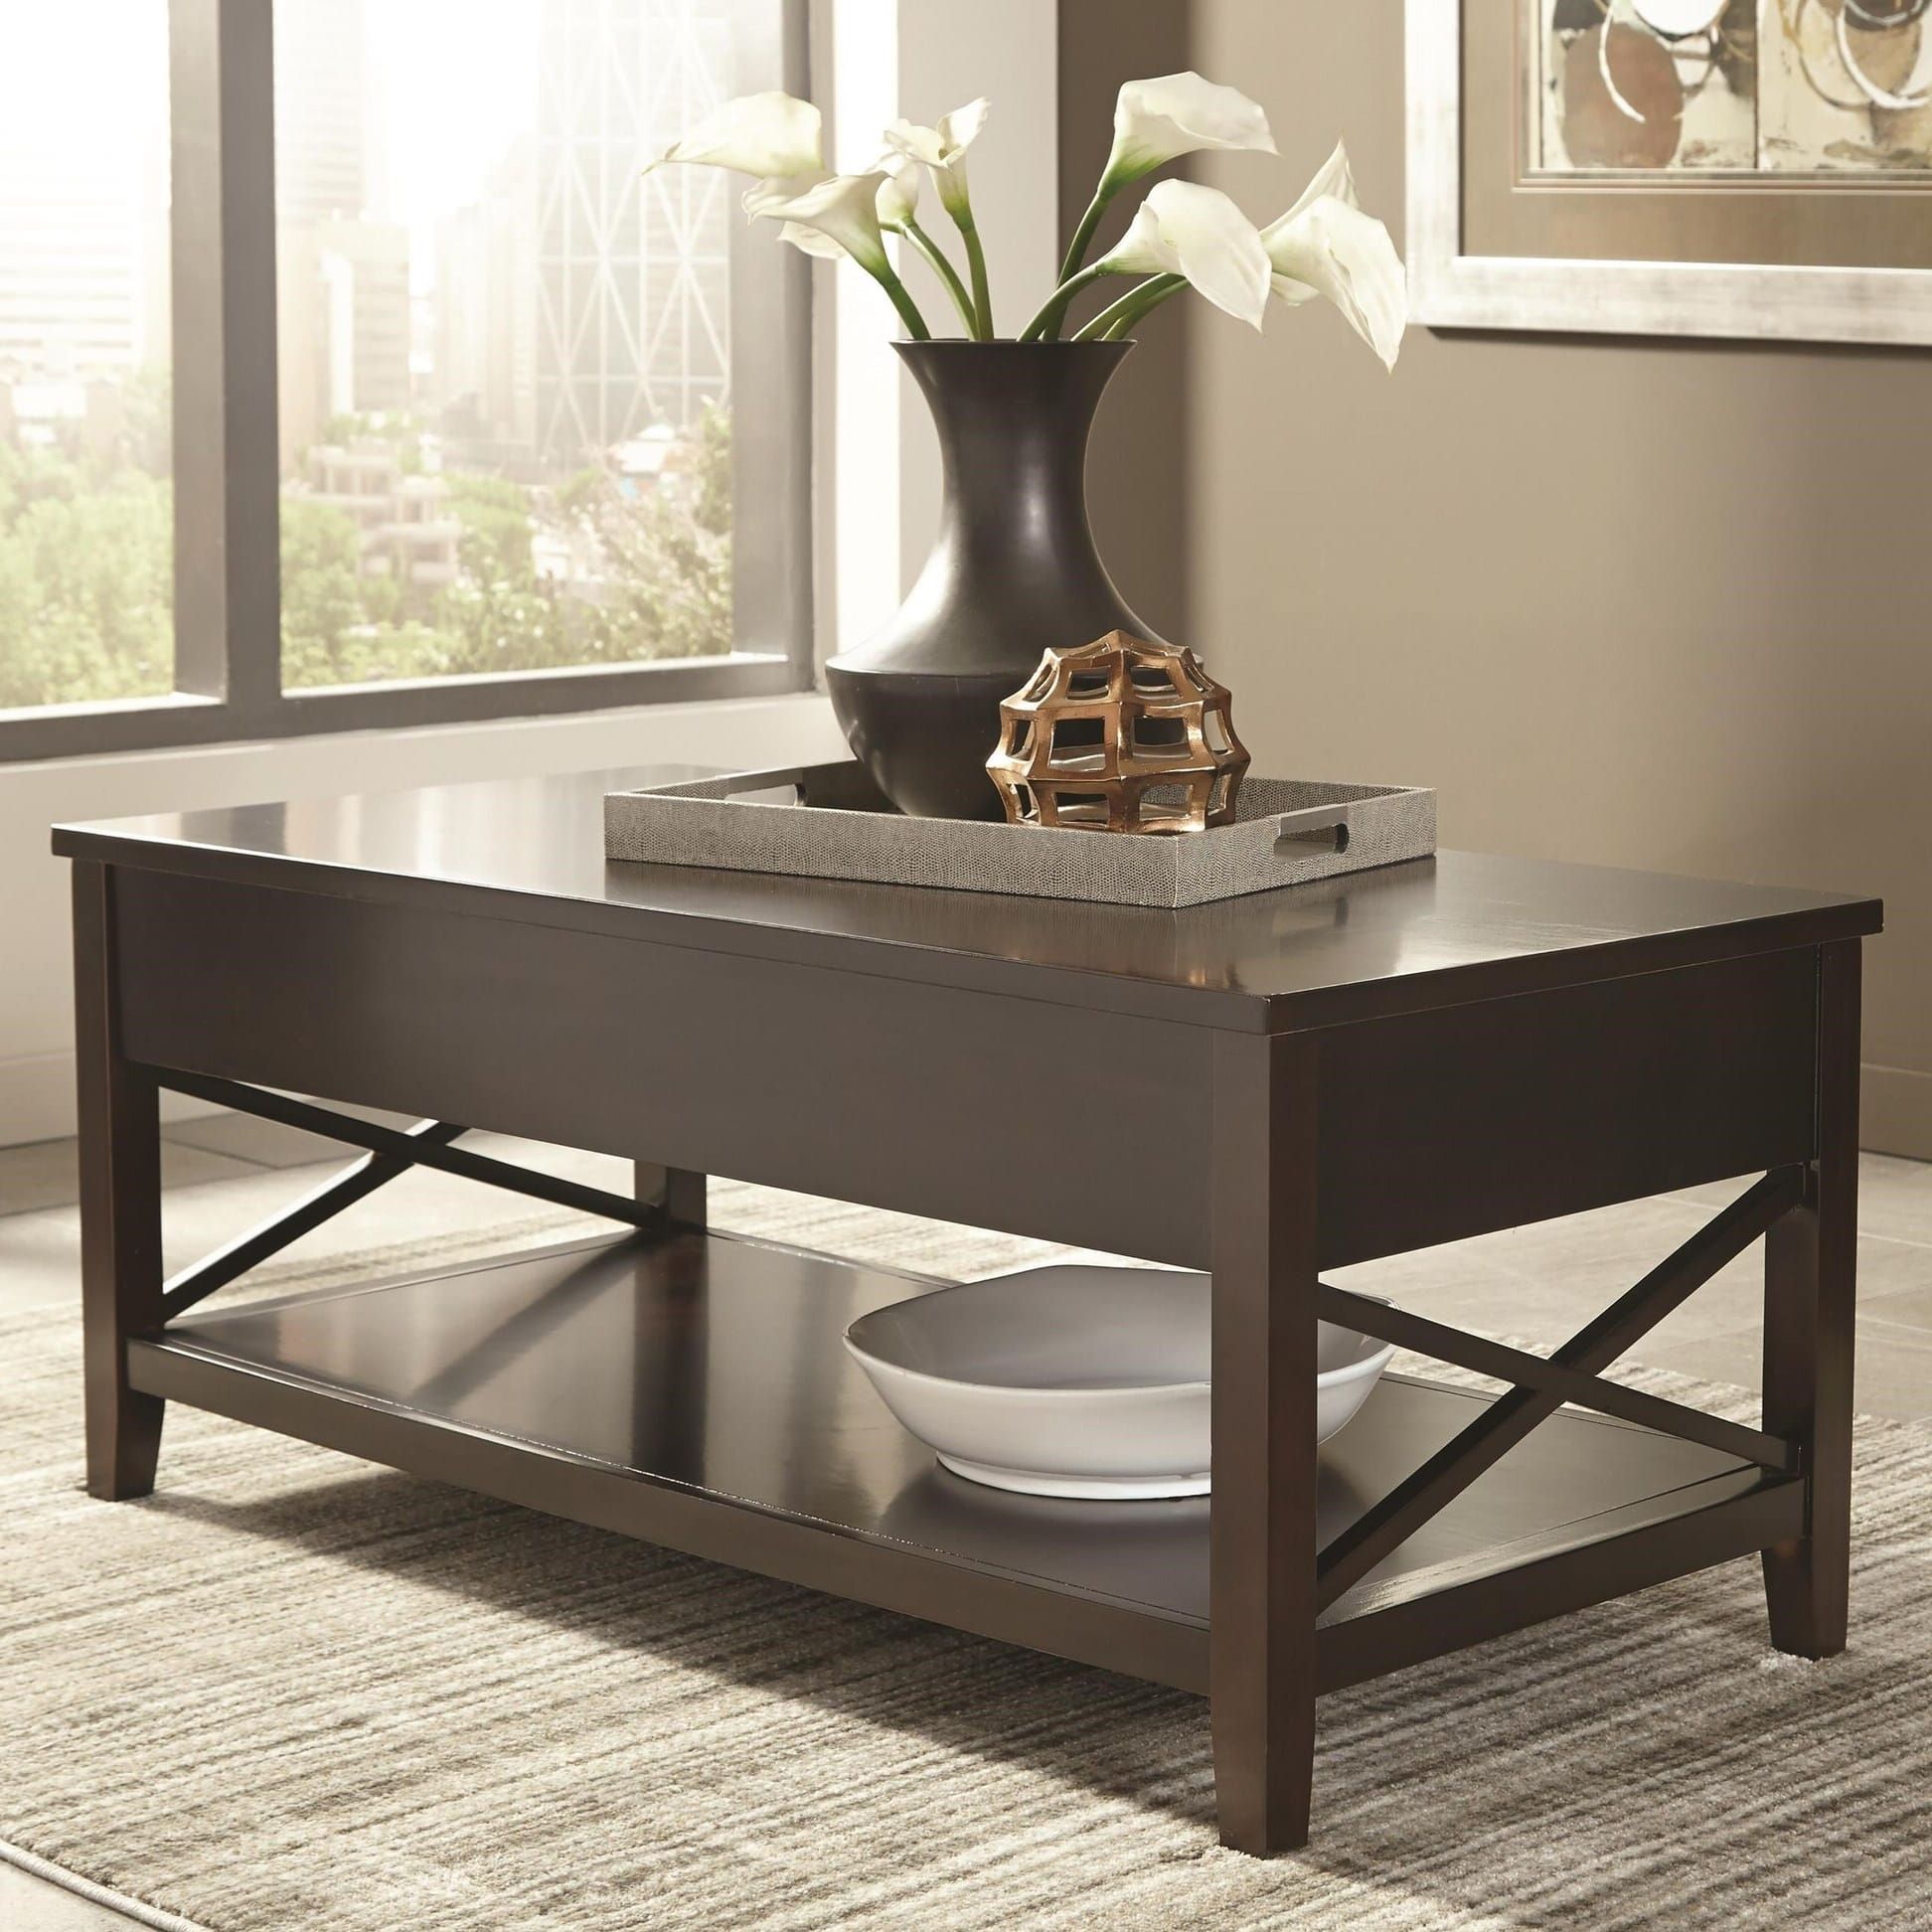 705688 Transitional Espresso Coffee Tablescott Living Pertaining To Famous Transitional Square Coffee Tables (View 13 of 15)